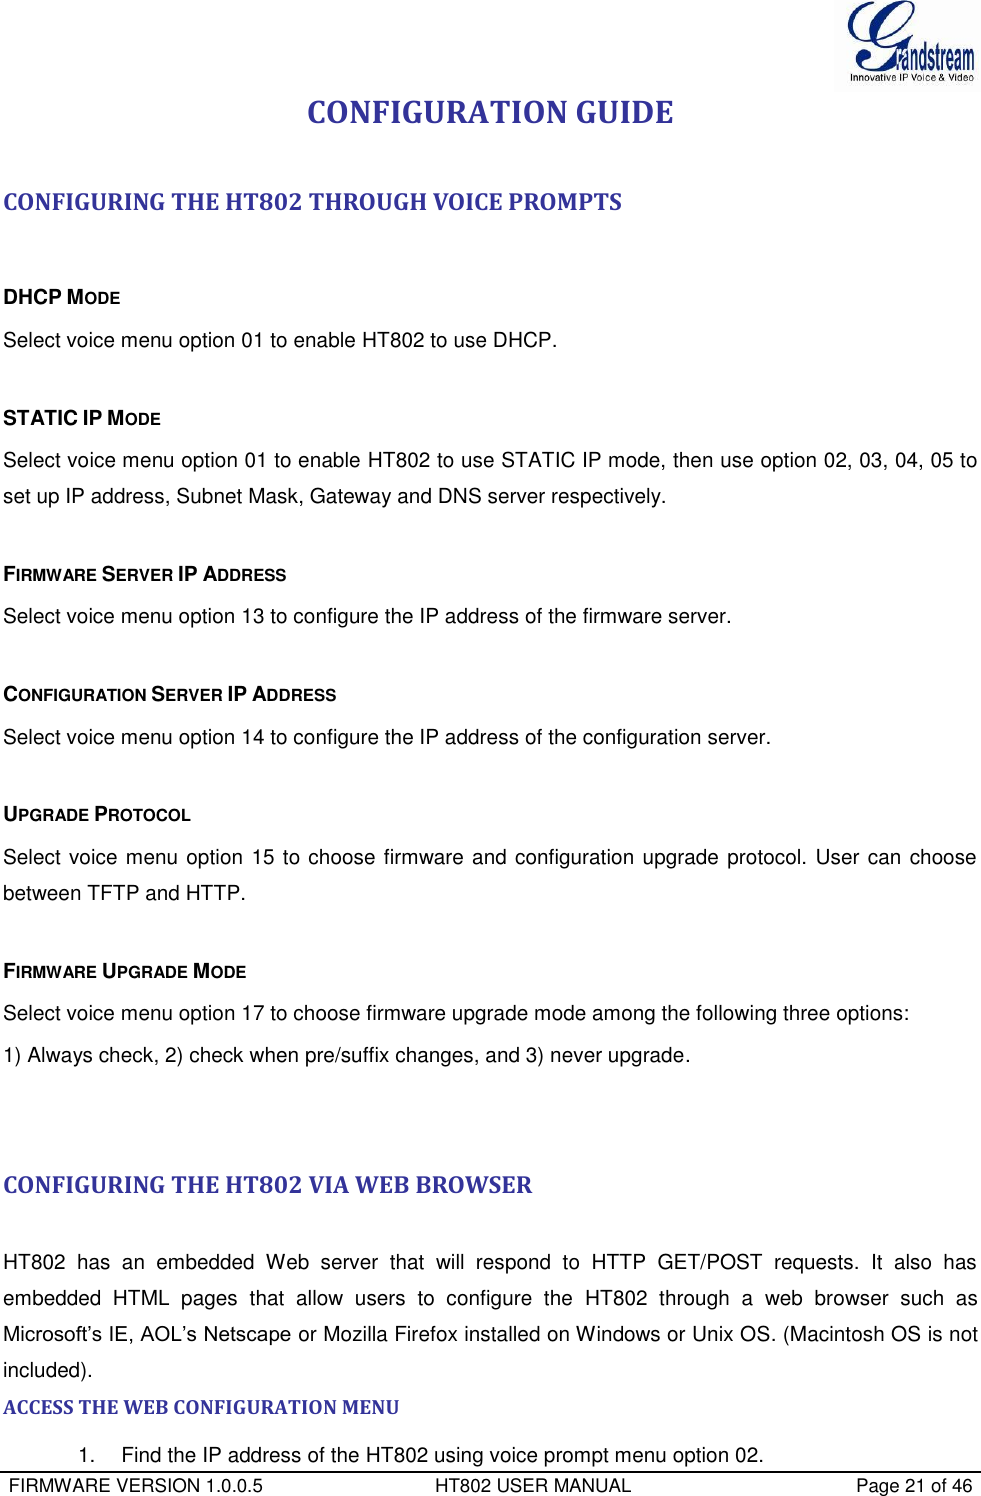  FIRMWARE VERSION 1.0.0.5                                 HT802 USER MANUAL                                           Page 21 of 46  CONFIGURATION GUIDE  CONFIGURING THE HT802 THROUGH VOICE PROMPTS   DHCP MODE Select voice menu option 01 to enable HT802 to use DHCP.  STATIC IP MODE  Select voice menu option 01 to enable HT802 to use STATIC IP mode, then use option 02, 03, 04, 05 to set up IP address, Subnet Mask, Gateway and DNS server respectively.  FIRMWARE SERVER IP ADDRESS  Select voice menu option 13 to configure the IP address of the firmware server.   CONFIGURATION SERVER IP ADDRESS  Select voice menu option 14 to configure the IP address of the configuration server.   UPGRADE PROTOCOL  Select voice menu option 15 to choose firmware and configuration upgrade protocol. User can choose between TFTP and HTTP.  FIRMWARE UPGRADE MODE  Select voice menu option 17 to choose firmware upgrade mode among the following three options:  1) Always check, 2) check when pre/suffix changes, and 3) never upgrade.   CONFIGURING THE HT802 VIA WEB BROWSER   HT802  has  an  embedded  Web  server  that  will  respond  to  HTTP  GET/POST  requests.  It  also  has embedded  HTML  pages  that  allow  users  to  configure  the  HT802  through  a  web  browser  such  as Microsoft’s IE, AOL’s Netscape or Mozilla Firefox installed on Windows or Unix OS. (Macintosh OS is not included). ACCESS THE WEB CONFIGURATION MENU 1.   Find the IP address of the HT802 using voice prompt menu option 02. 